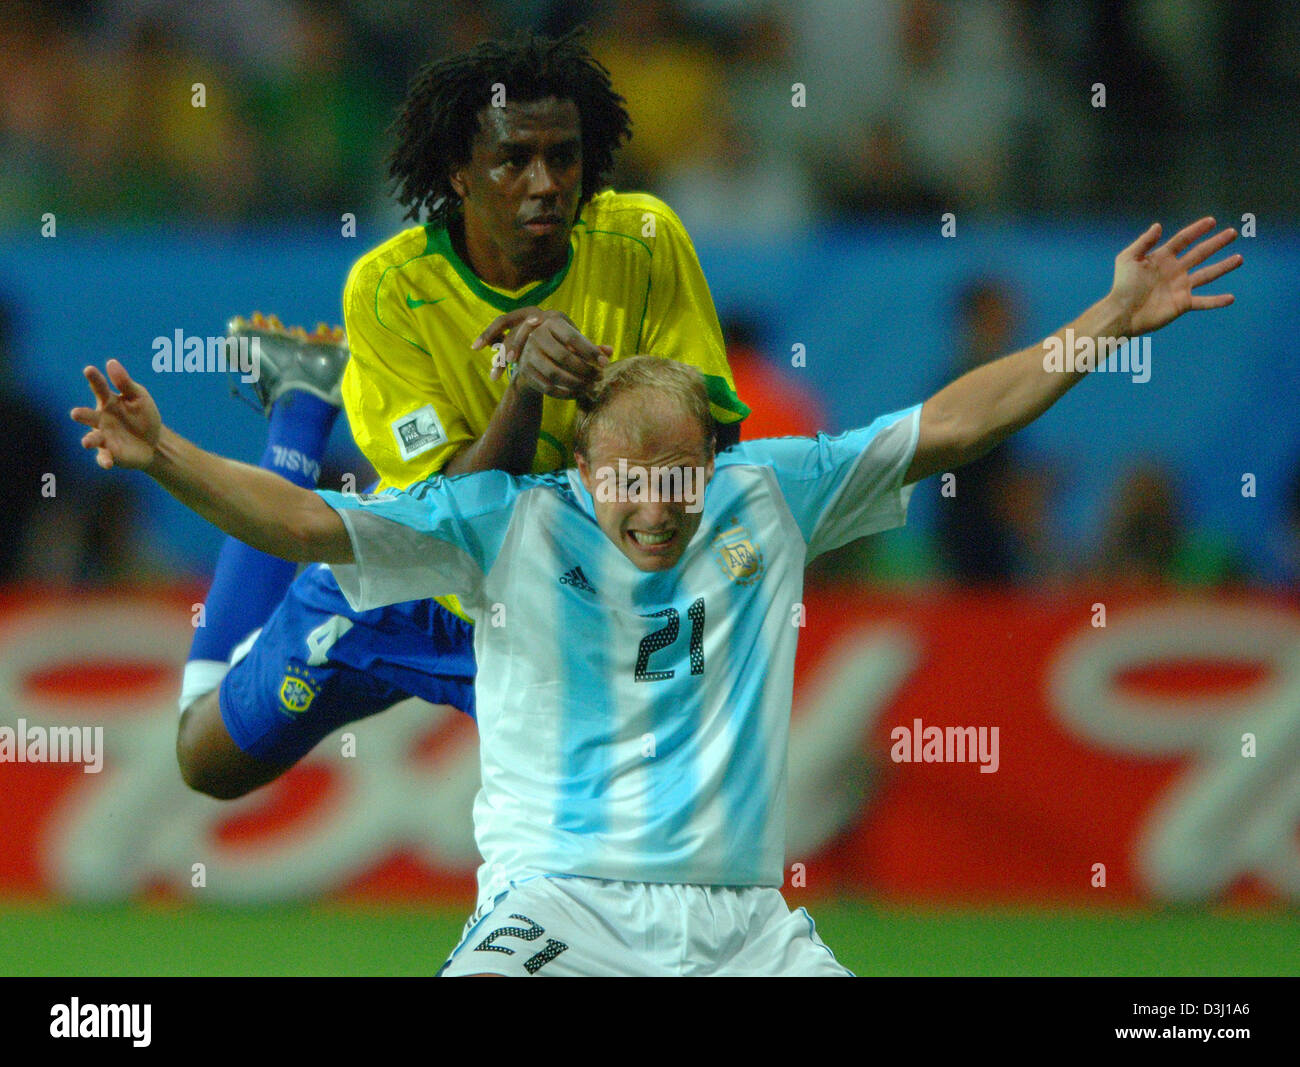 (dpa) - Brazilian soccer player Roque Junior (L) vies for the ball with Argentinian Luciano Figueroa during the finals of the Confederations Cup tournament inthe match Brazil vs Argentina in Frankfurt, Germany,  29 June  2005. (Eds: Internet use and mobile applications subject to FIFA's terms and conditions) Stock Photo